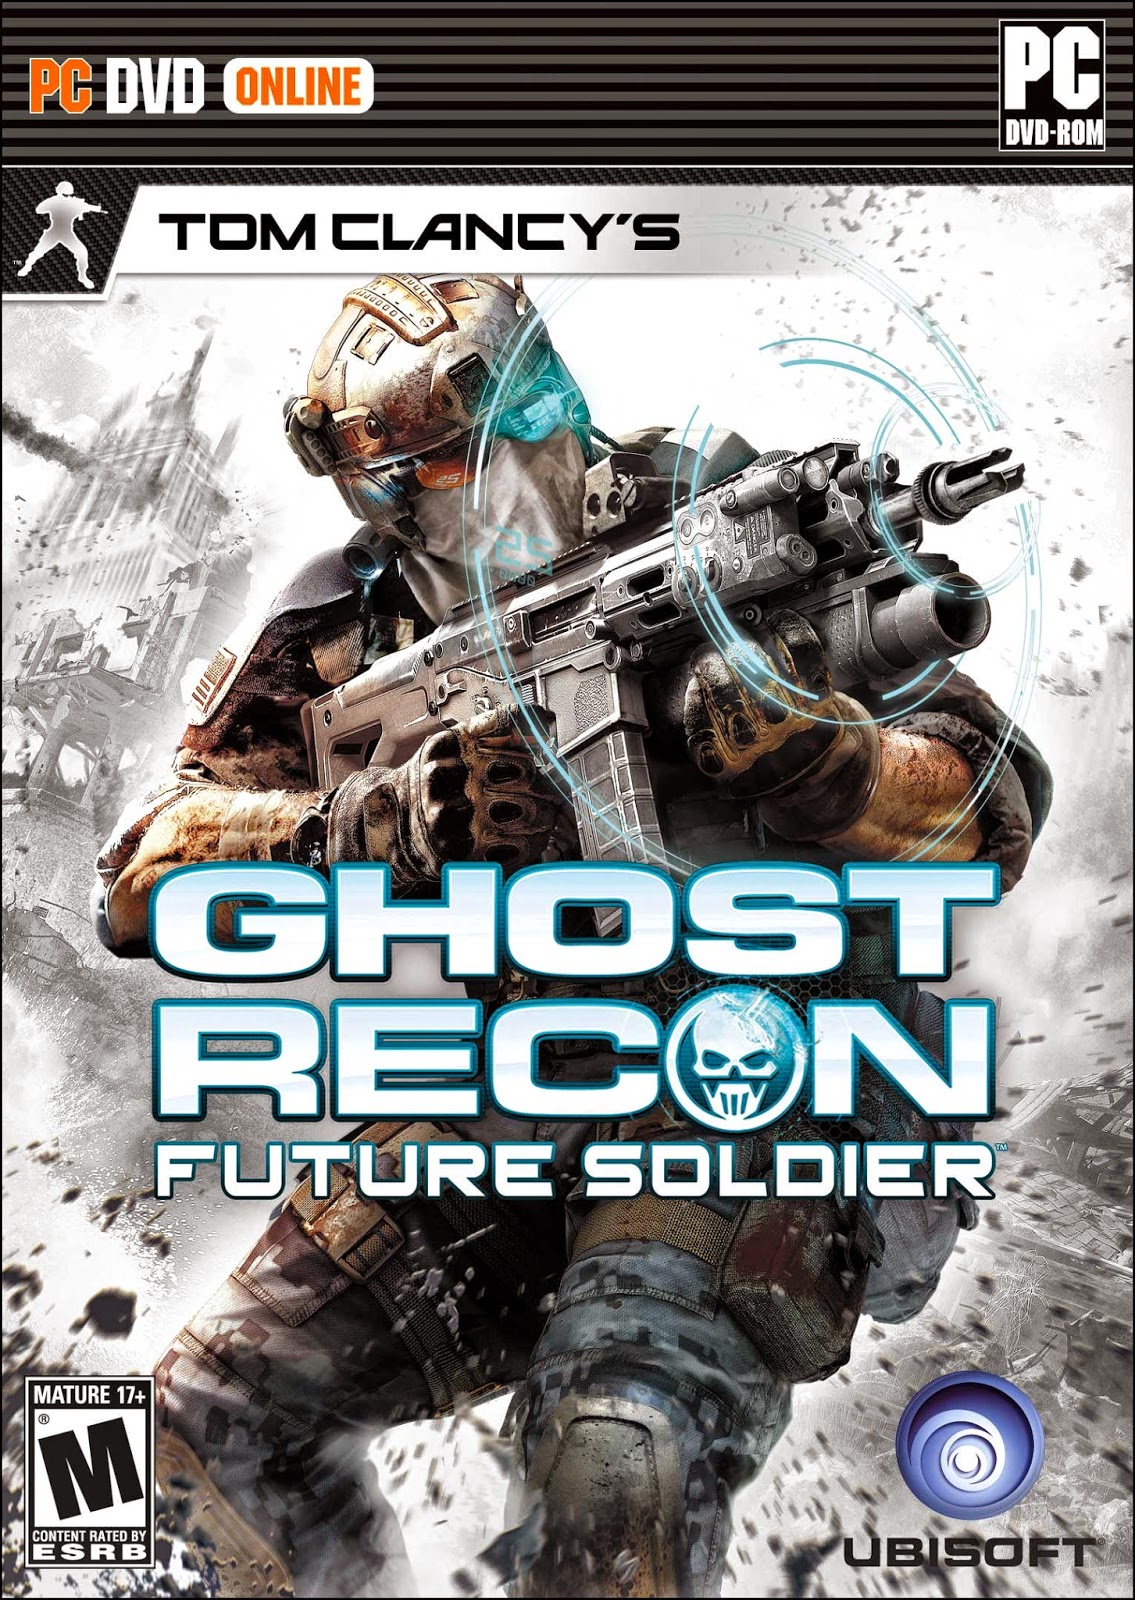 TOM CLANCYS GHOST RECON FUTURE SOLDIER  - PC GAME